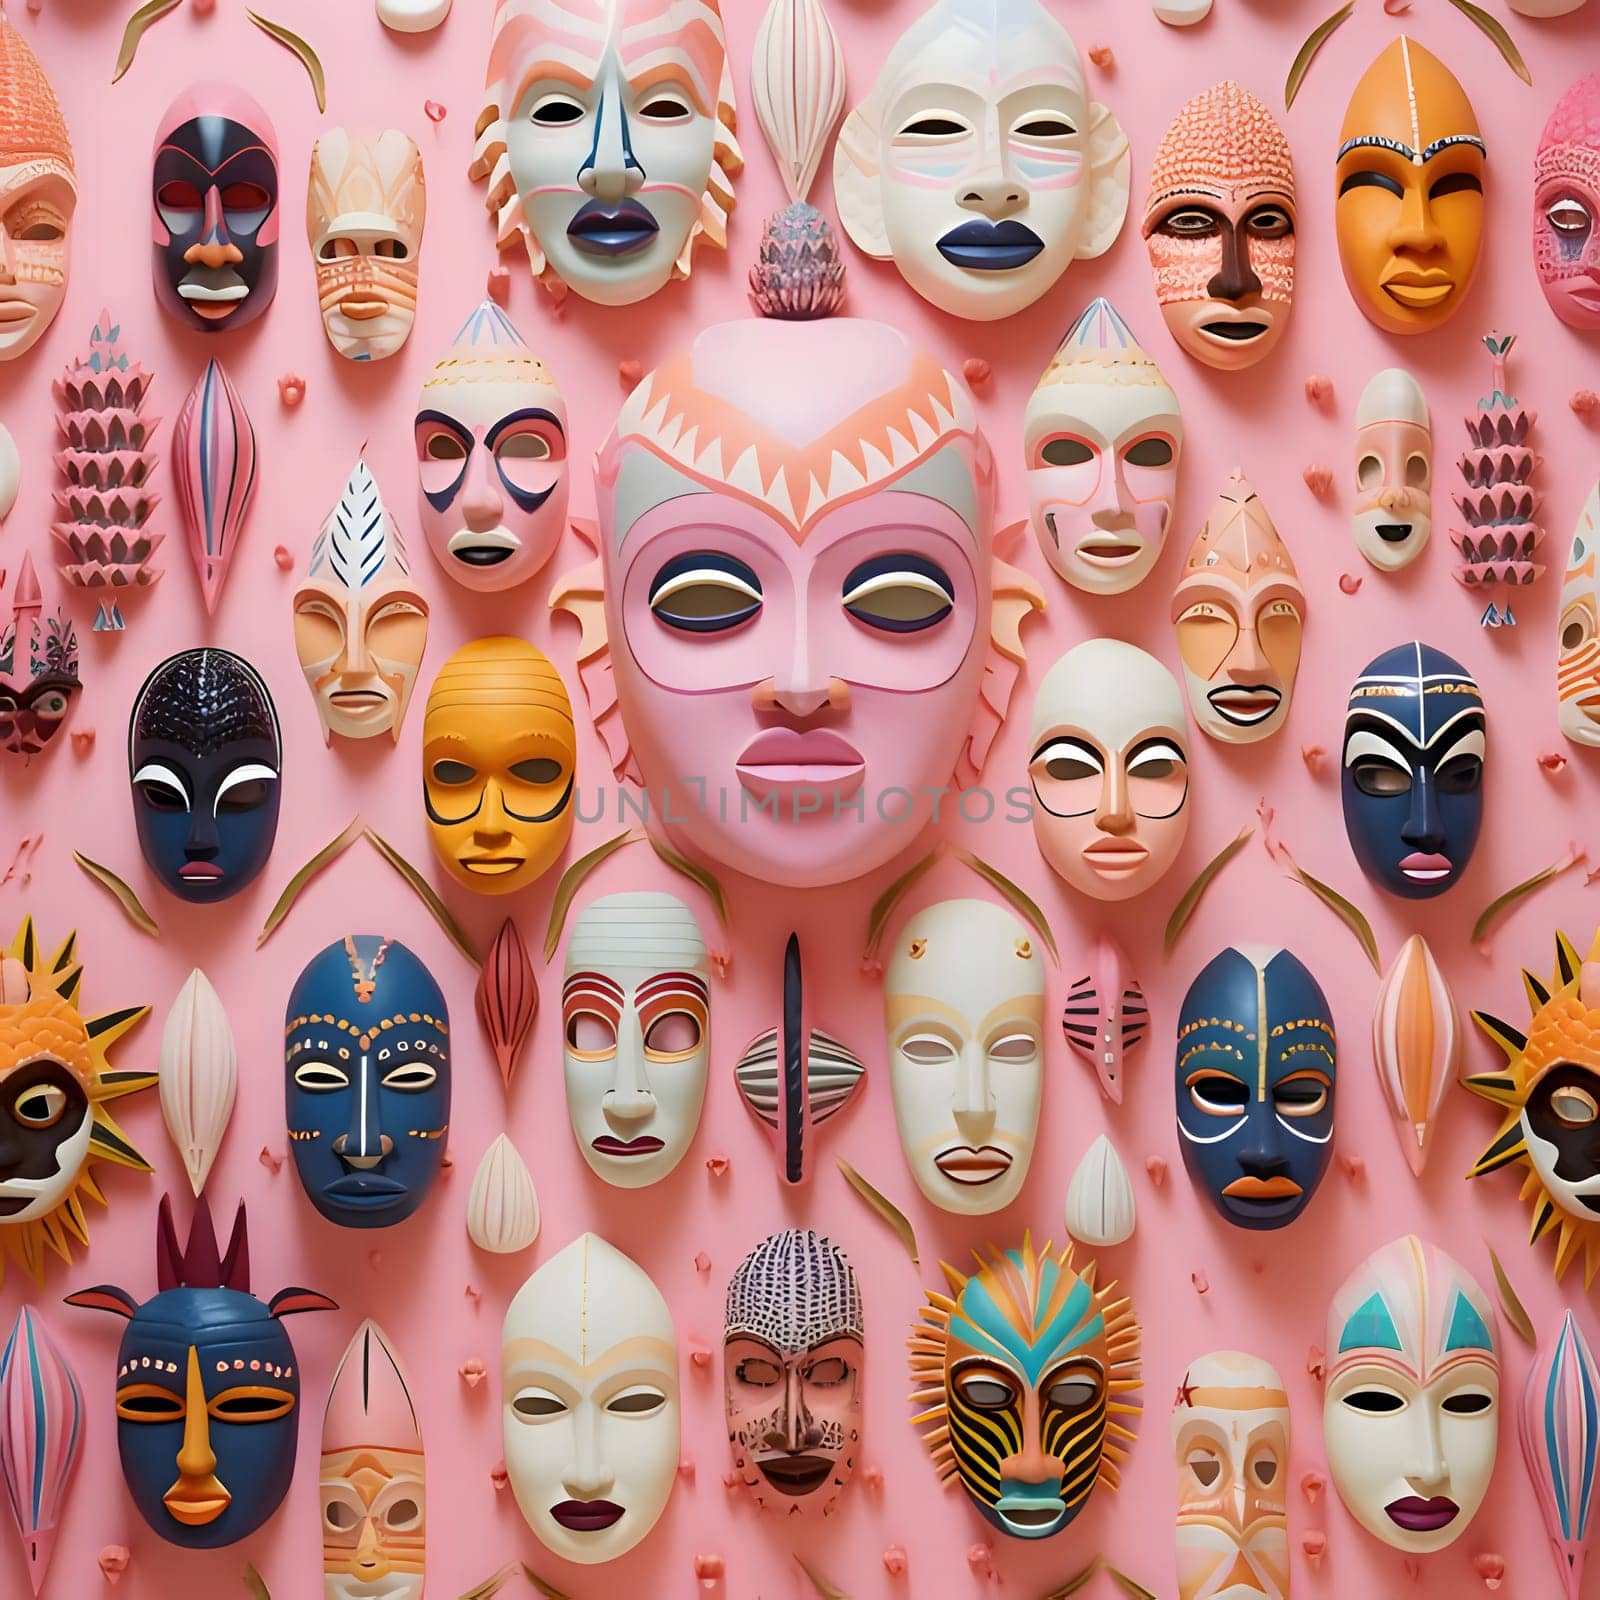 Patterns and banners backgrounds: Seamless pattern of masks on a pink background. 3d illustration